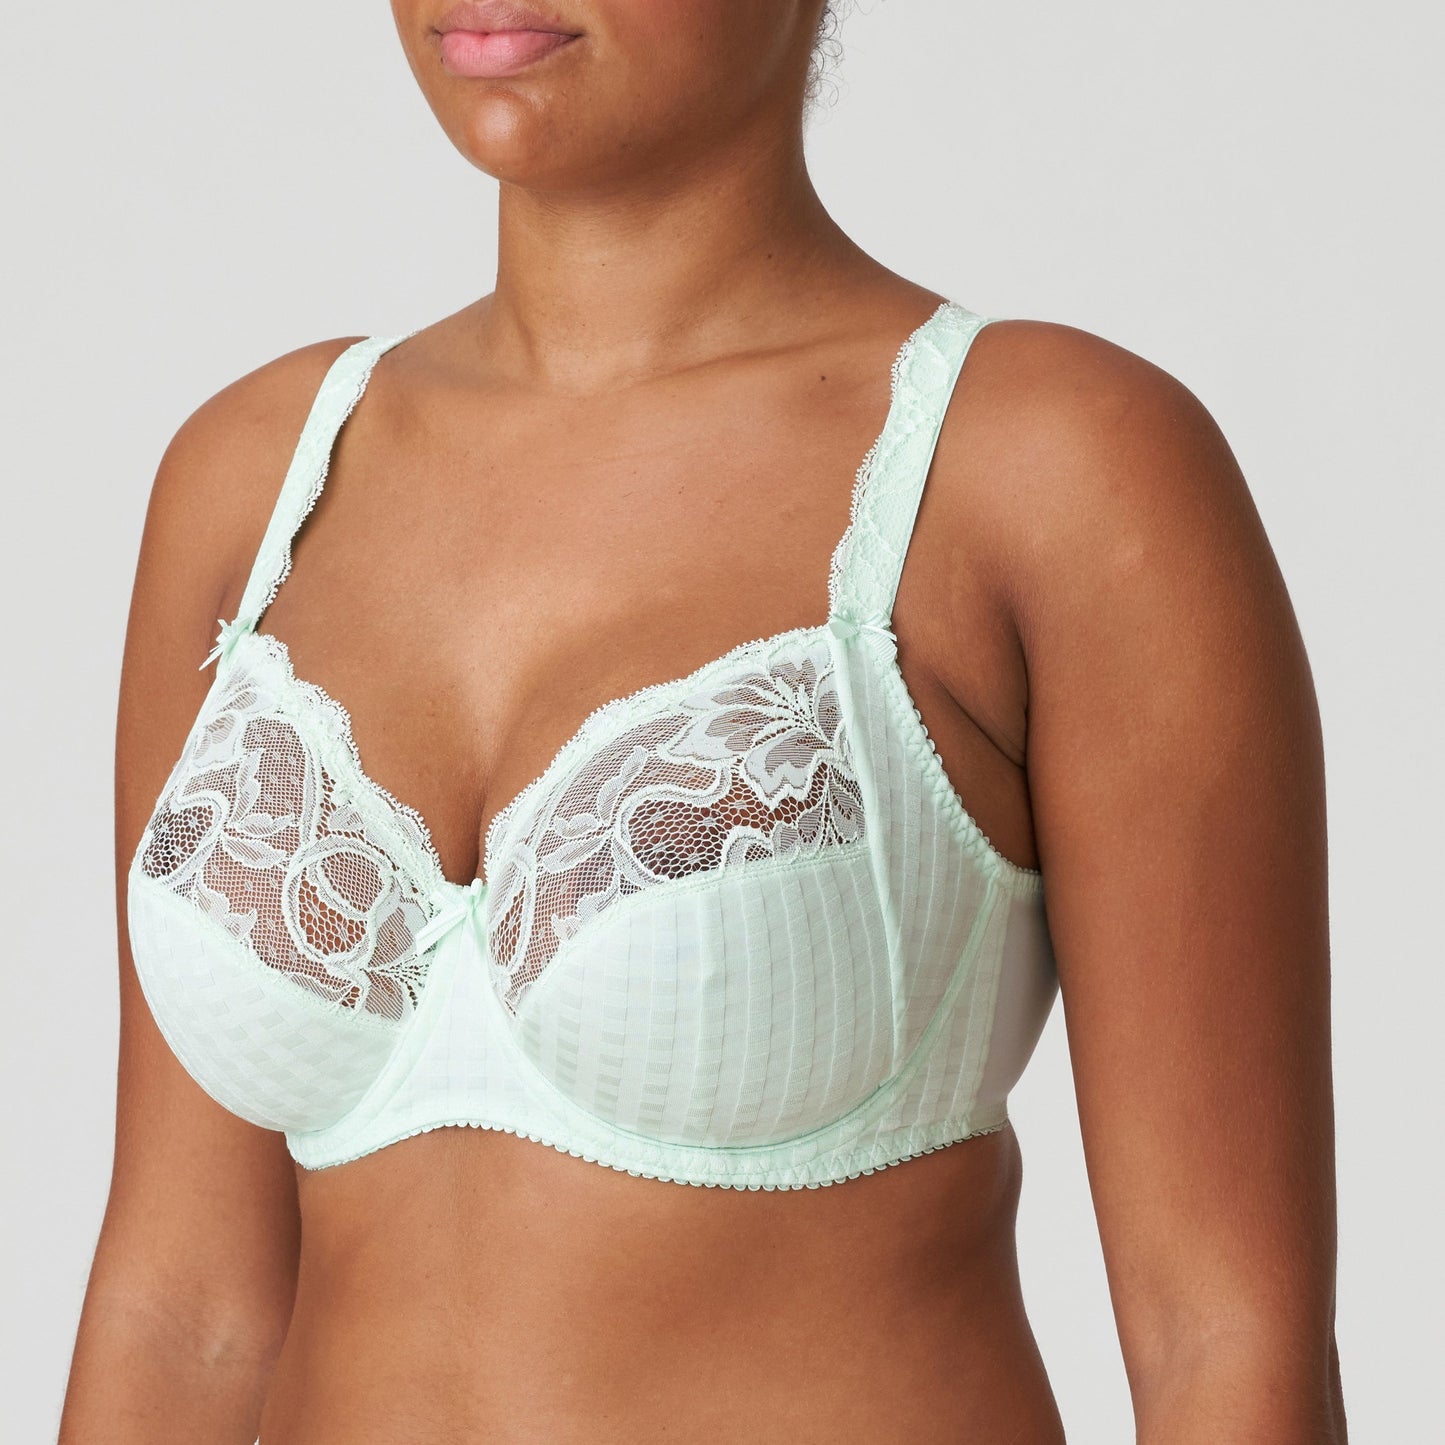 Side view of a woman wearing the DD+ Madison Full Cup Bra in Duck Egg by PrimaDonna.